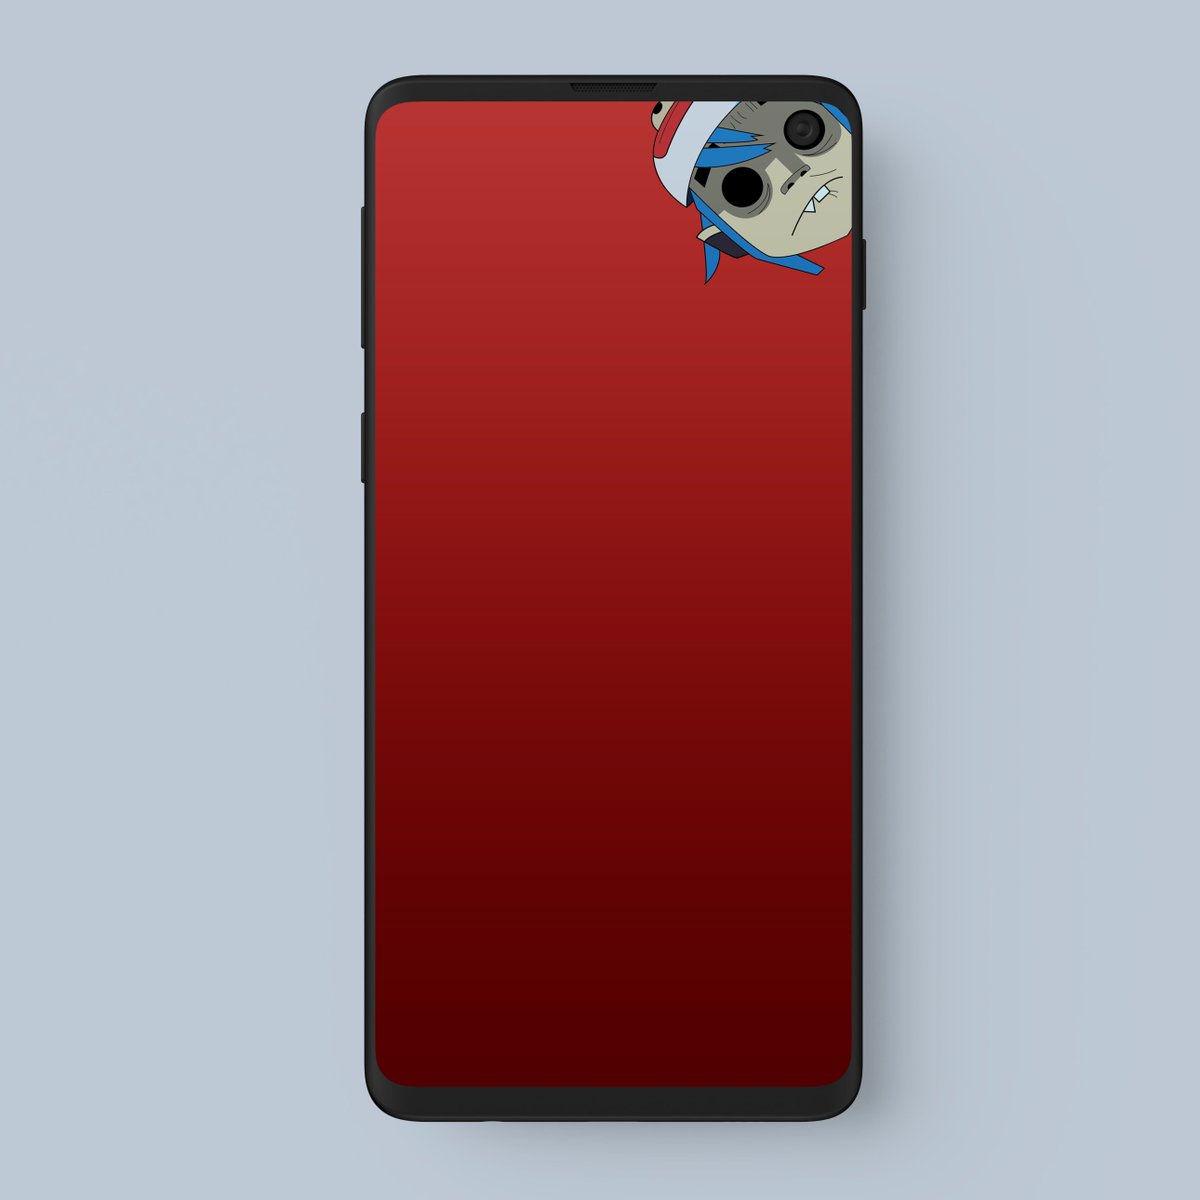 gorillaz wallpaper,mobile phone case,red,mobile phone accessories,mobile phone,gadget